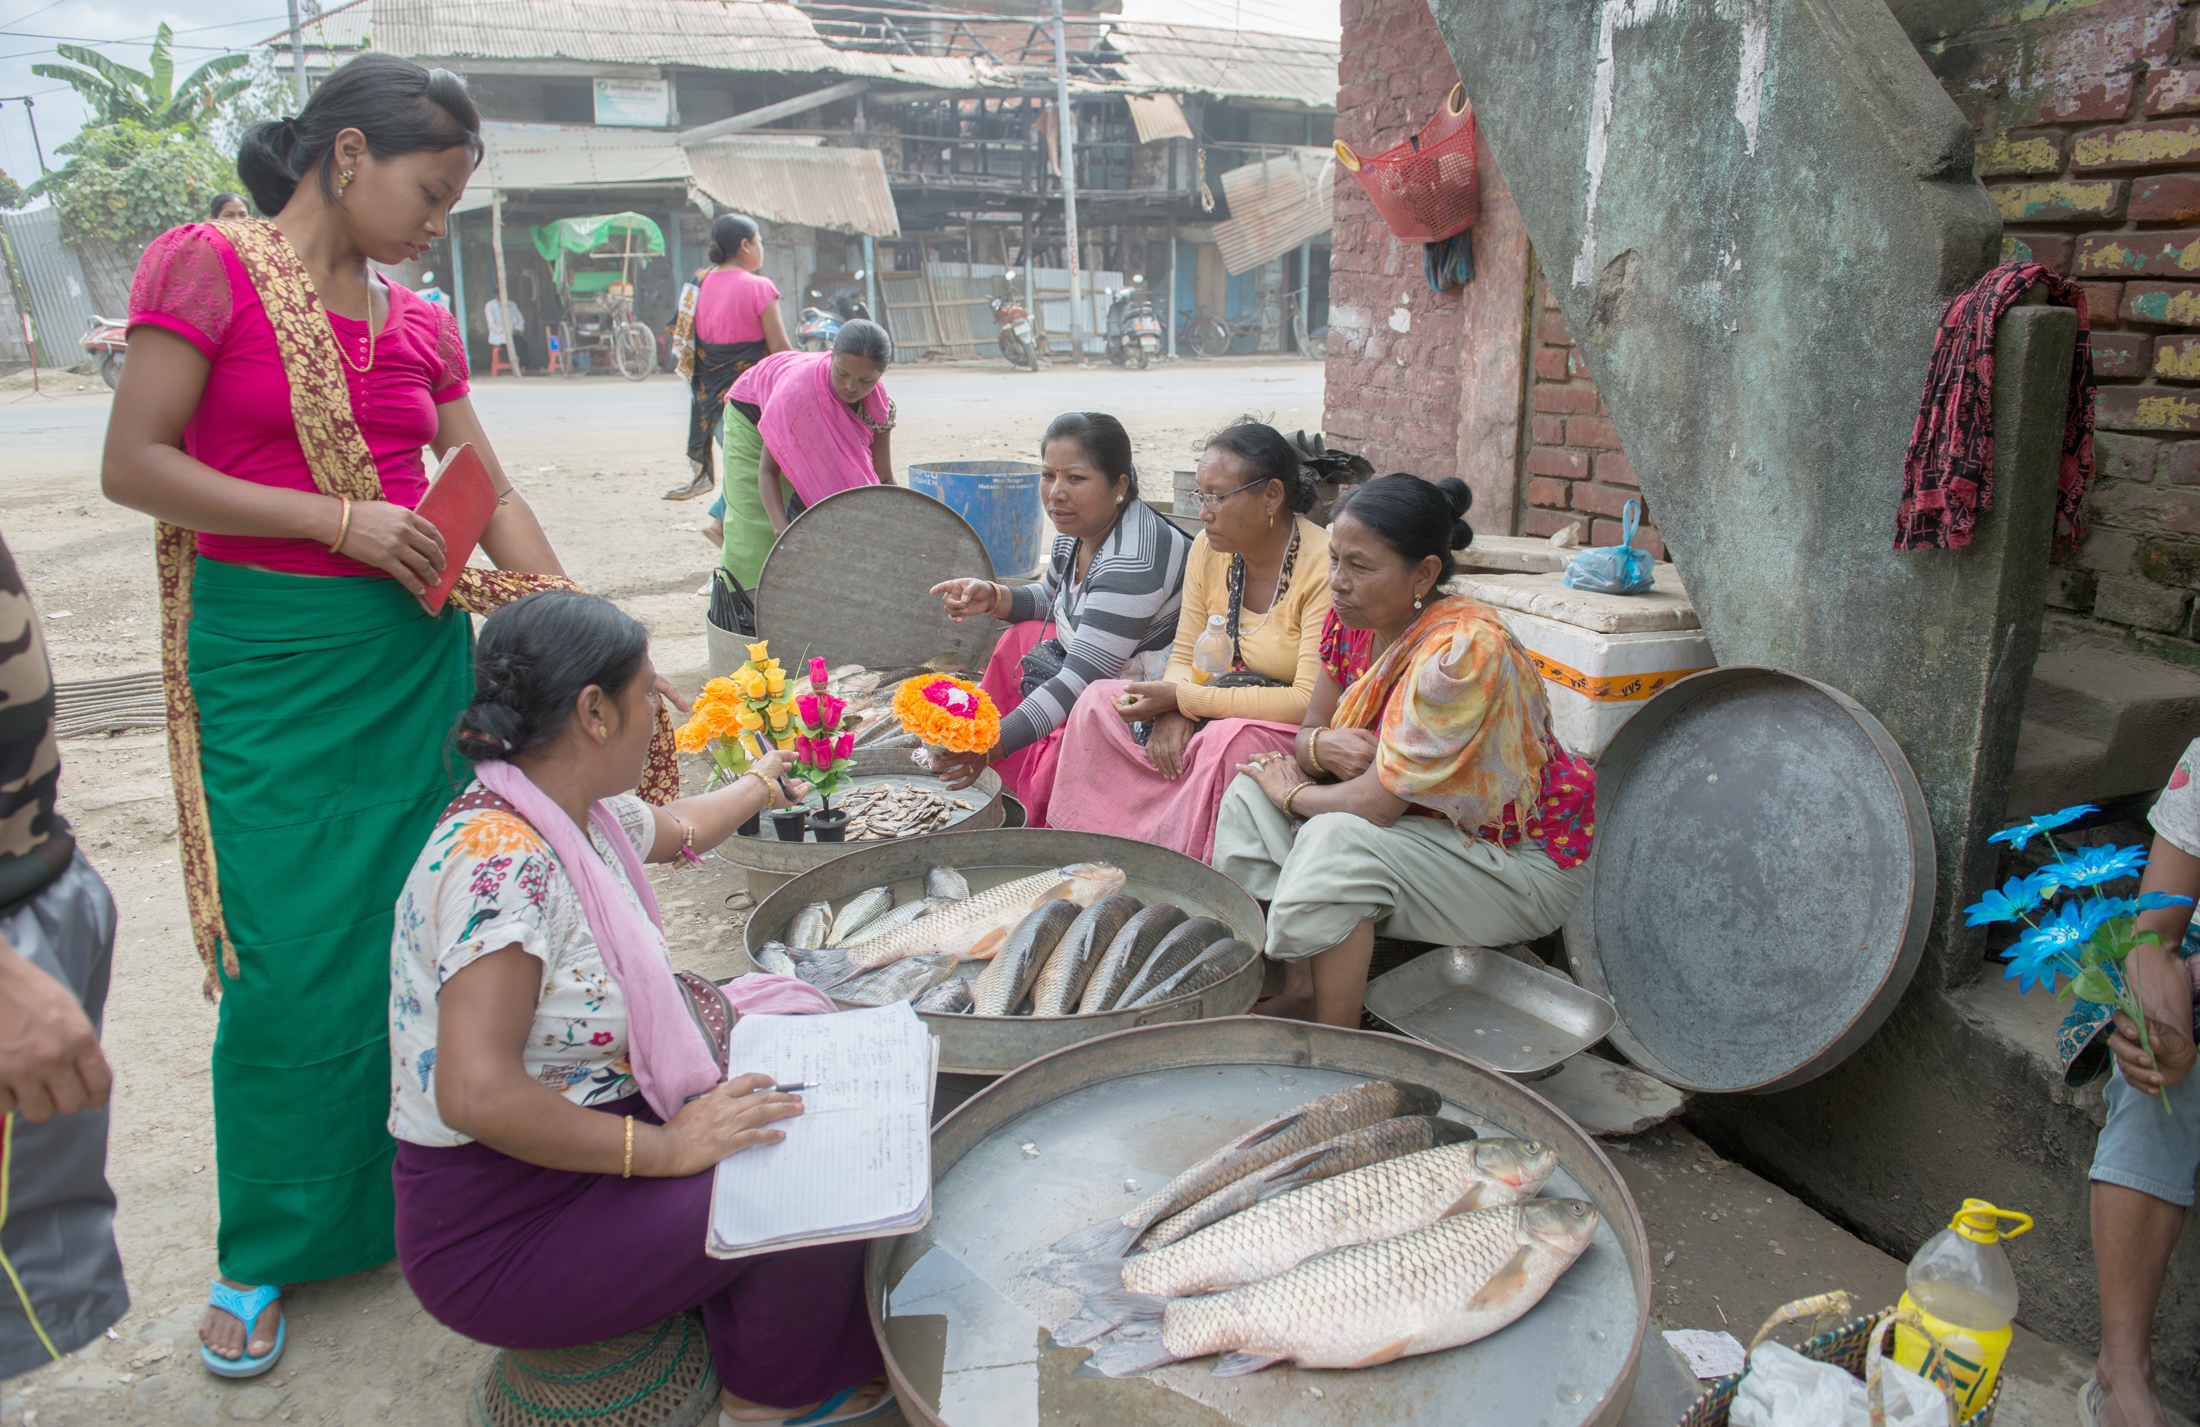  Fisherwomen and vegetable vendors wrap up business for the day in the Ema market in...